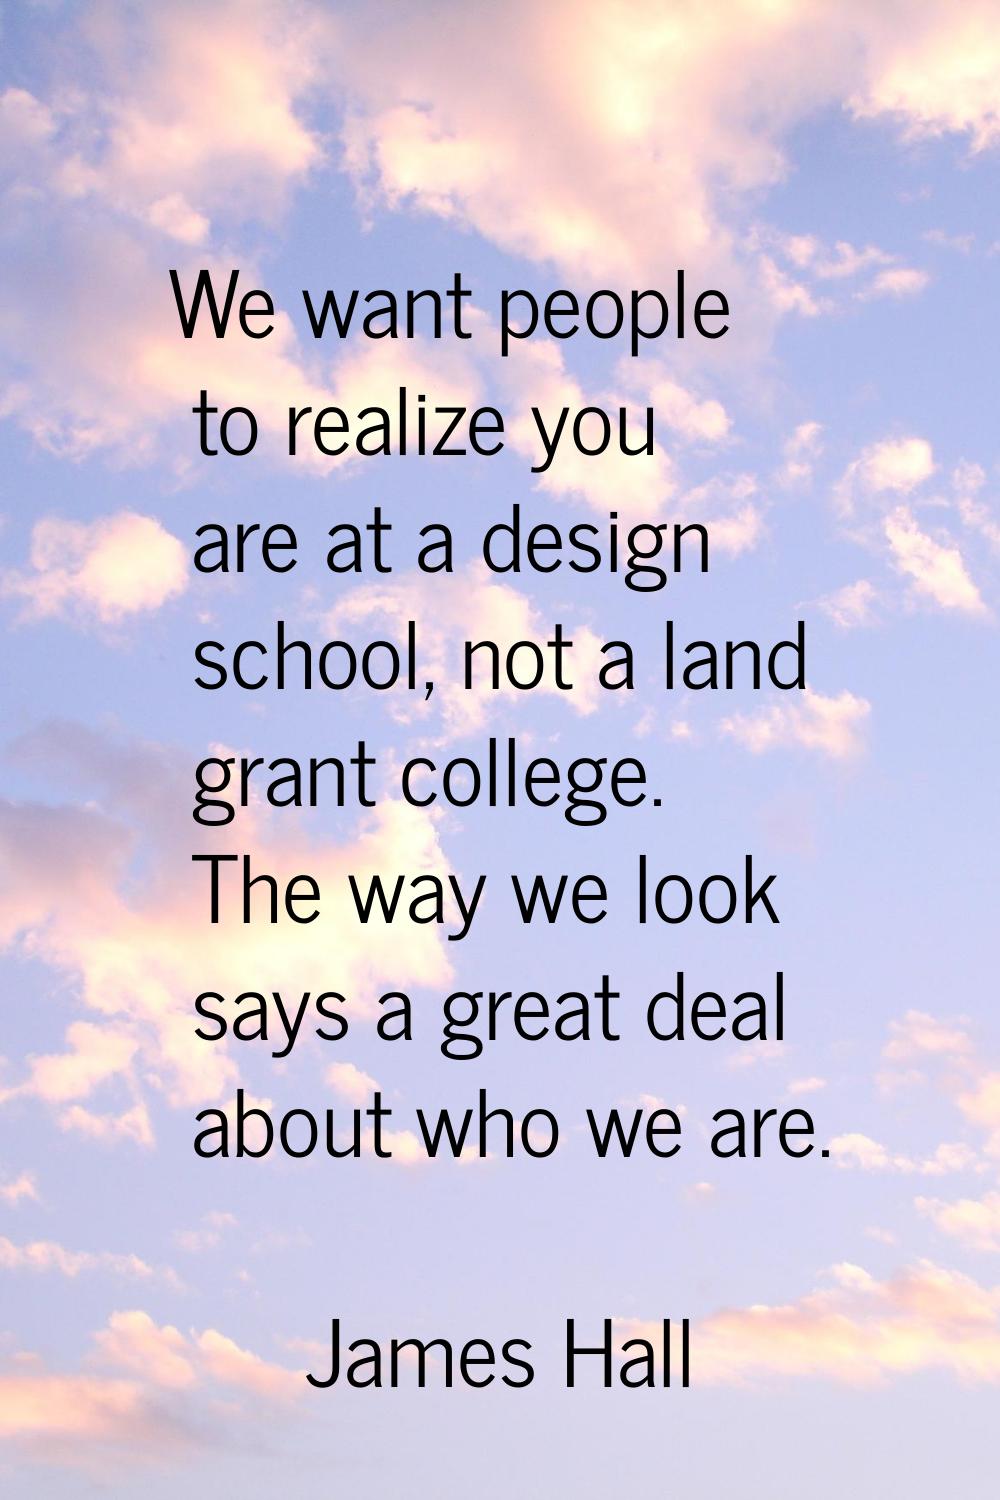 We want people to realize you are at a design school, not a land grant college. The way we look say